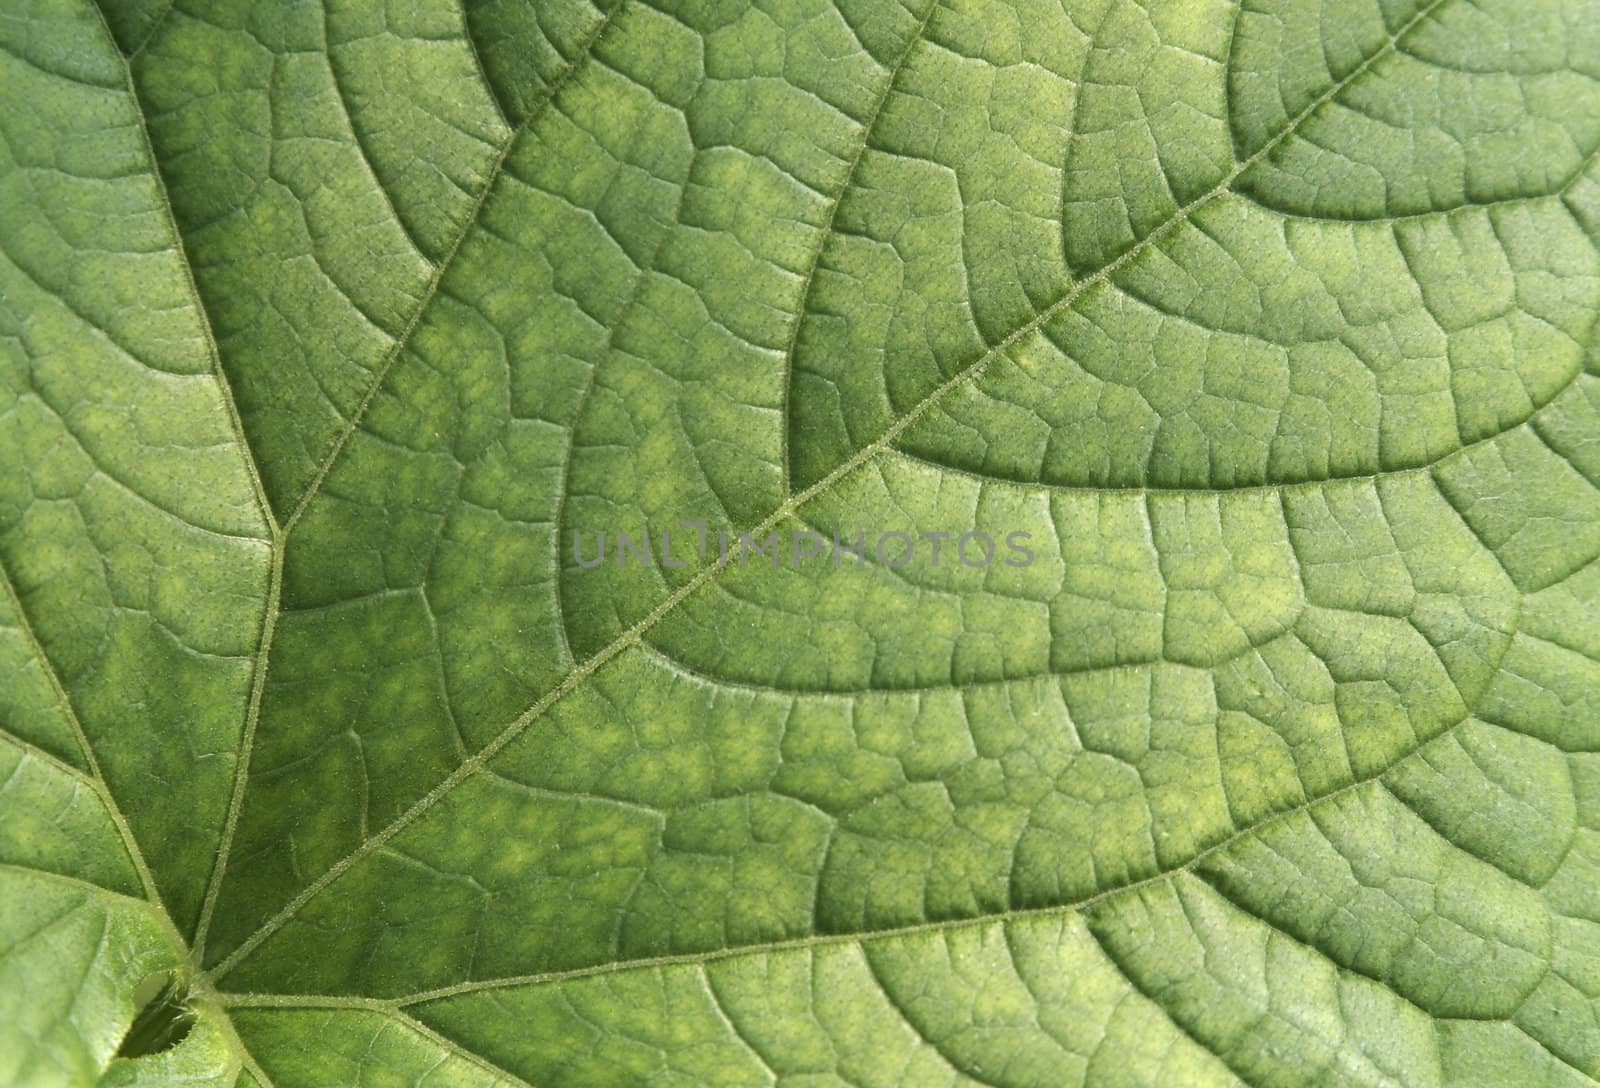 Green leaf texture. Can be used as background